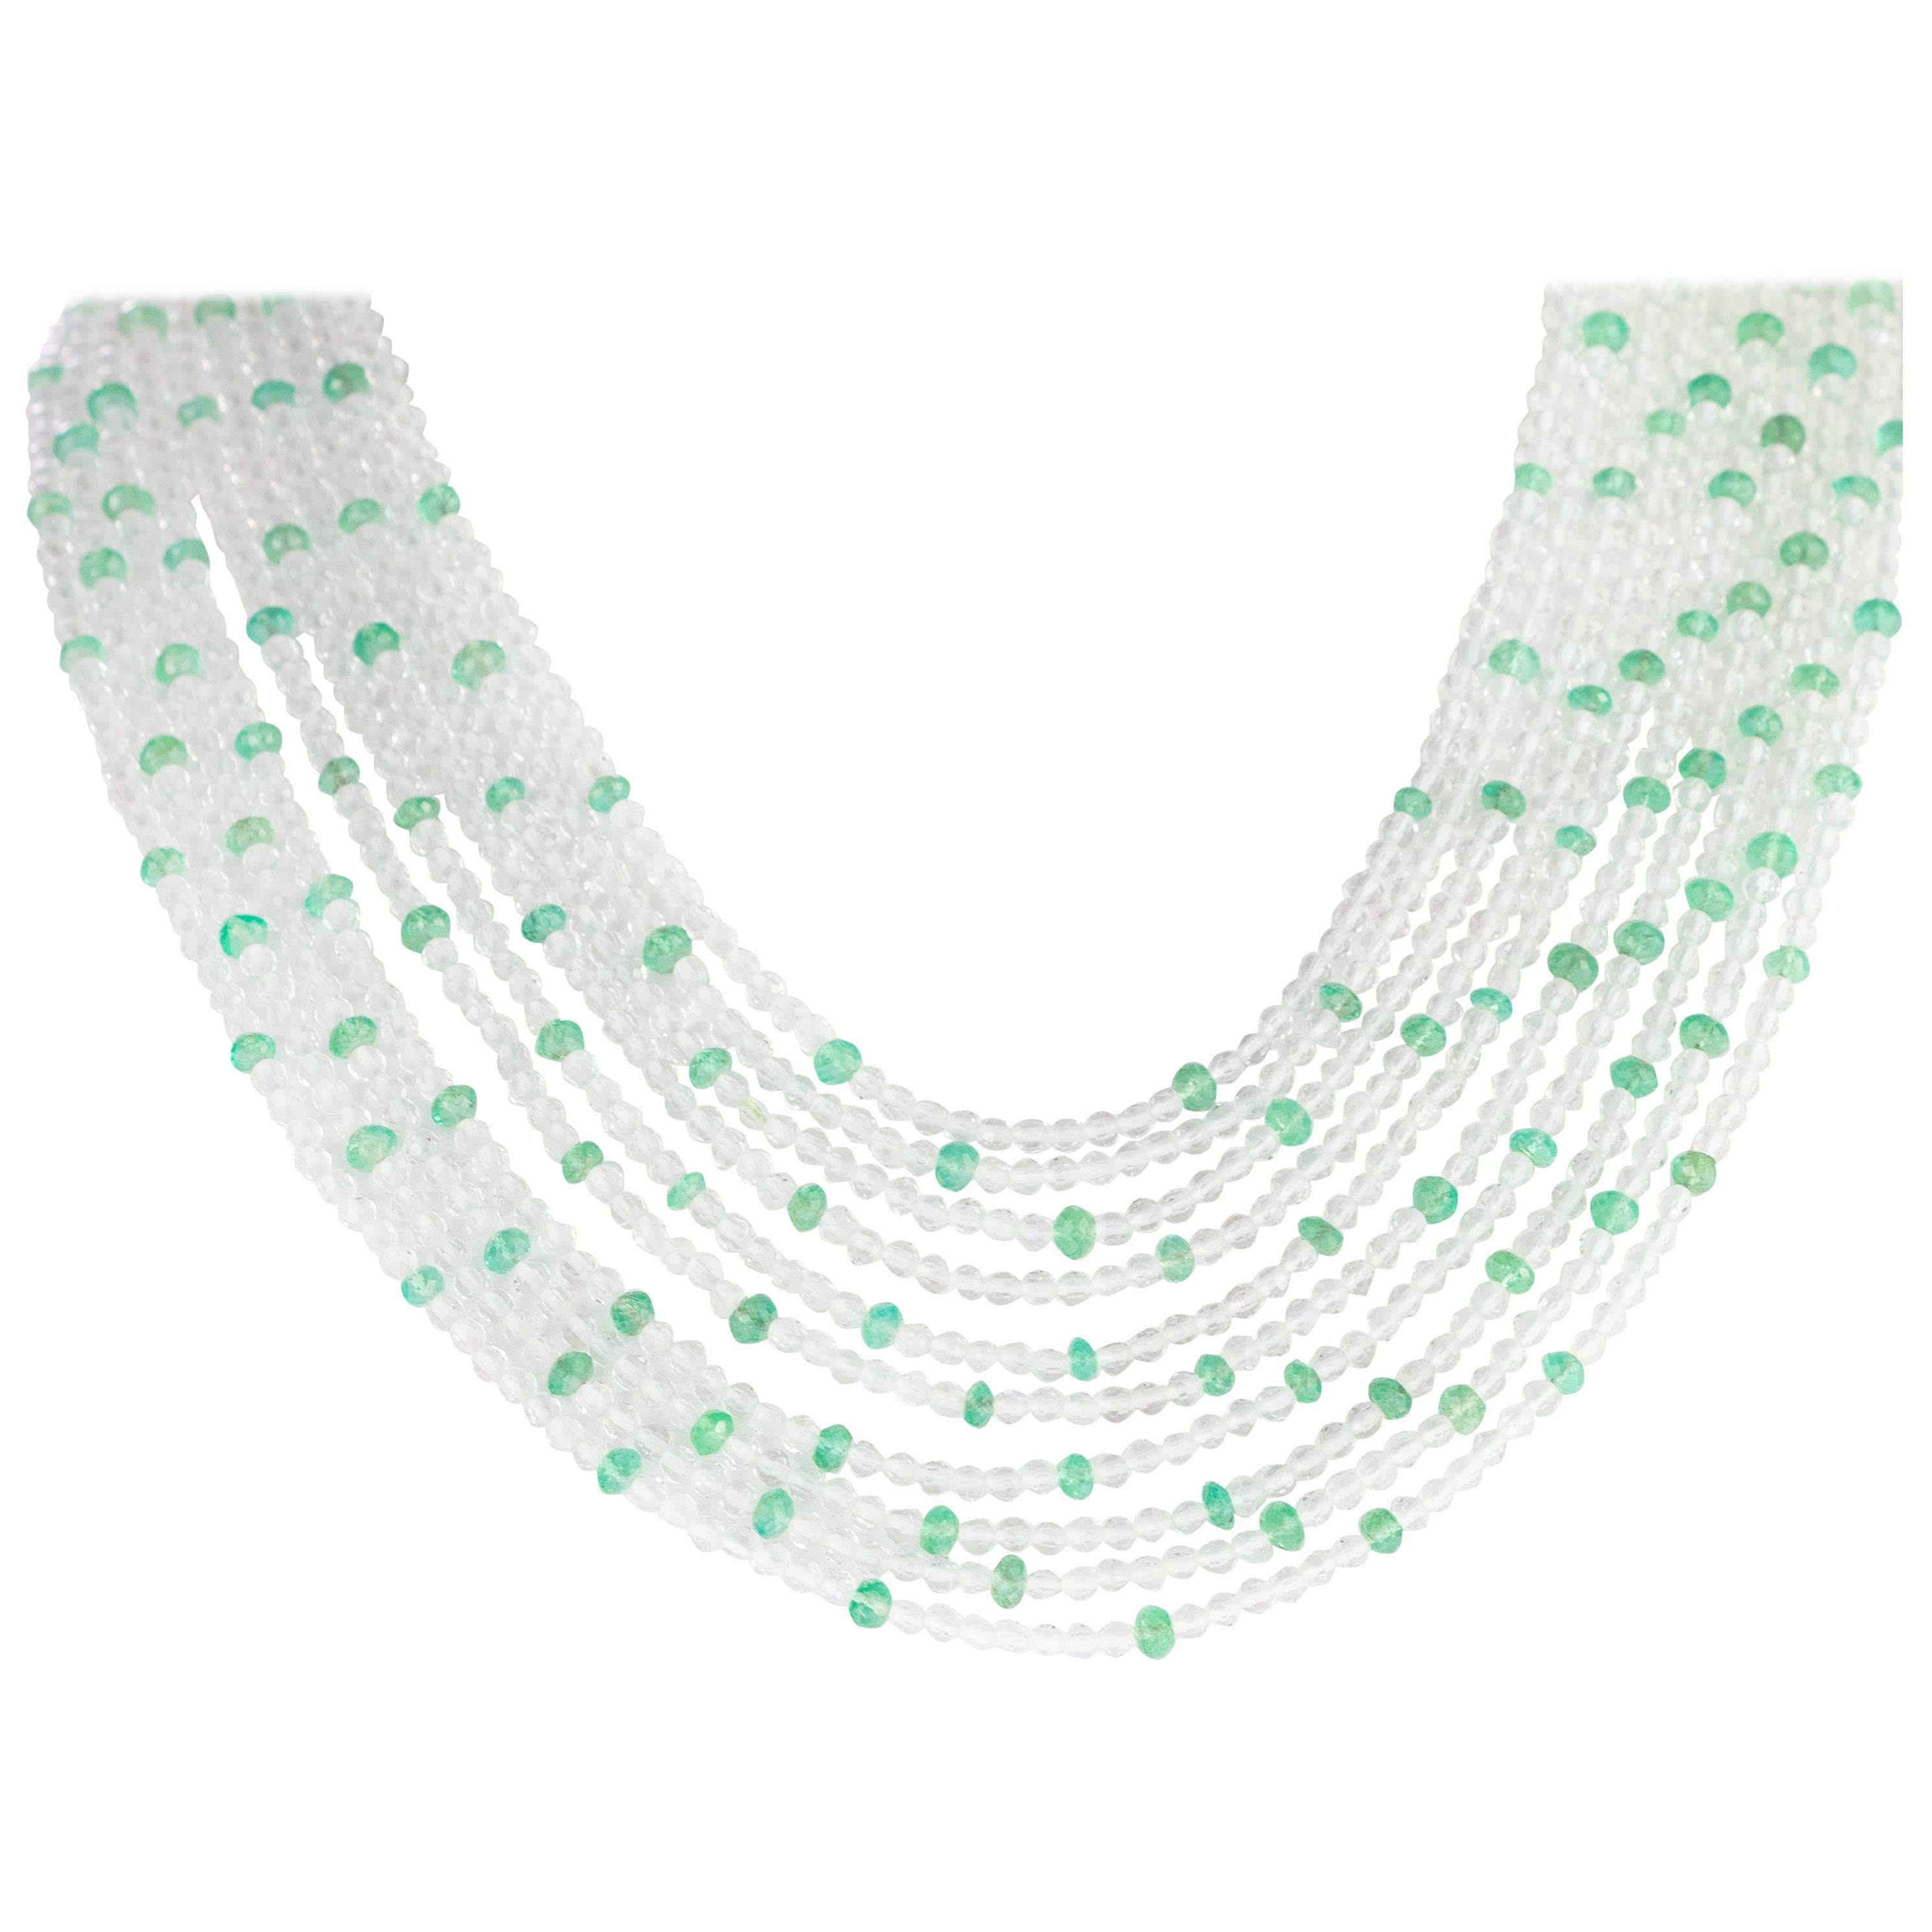 Emerald Rock Crystal 925 Sterling Silver Multi Strand Beaded Cocktail Necklace